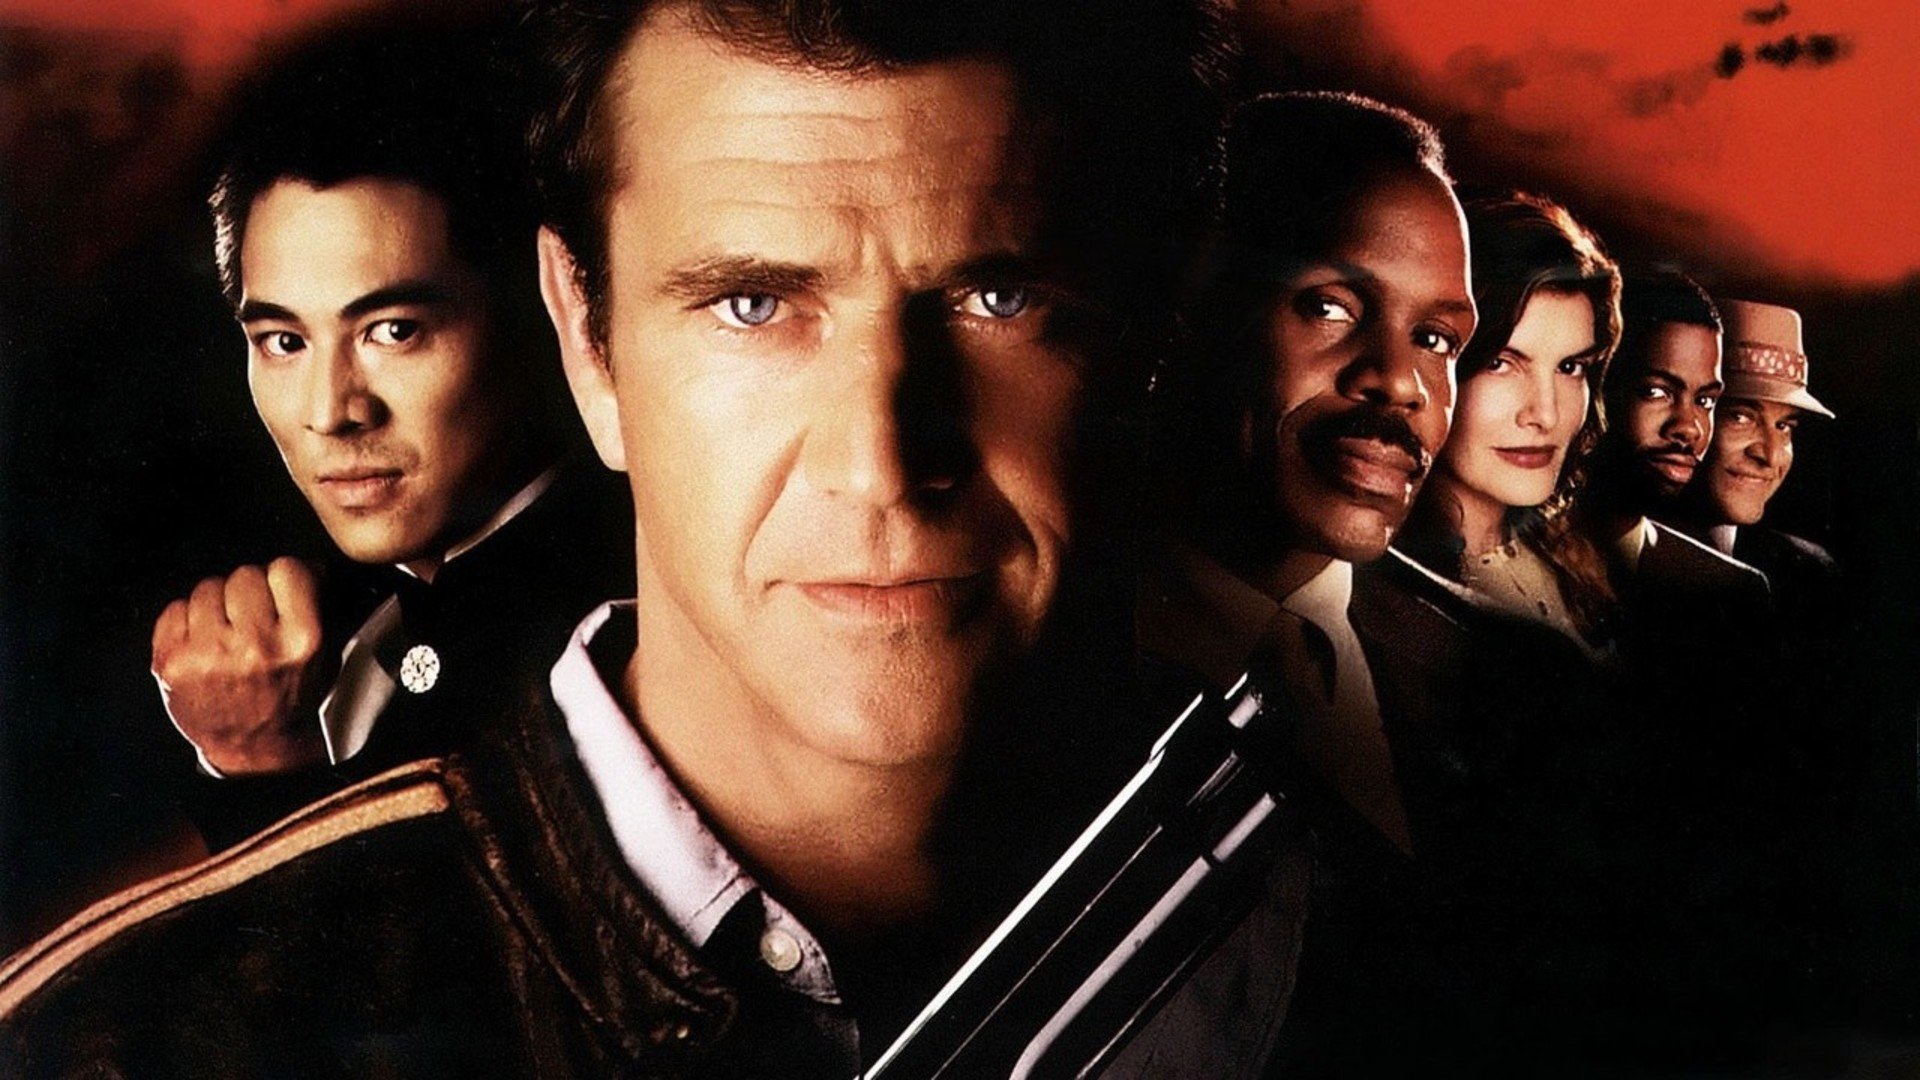 LETHAL WEAPON action thriller crime comedy wallpaper | 1920x1080 ...